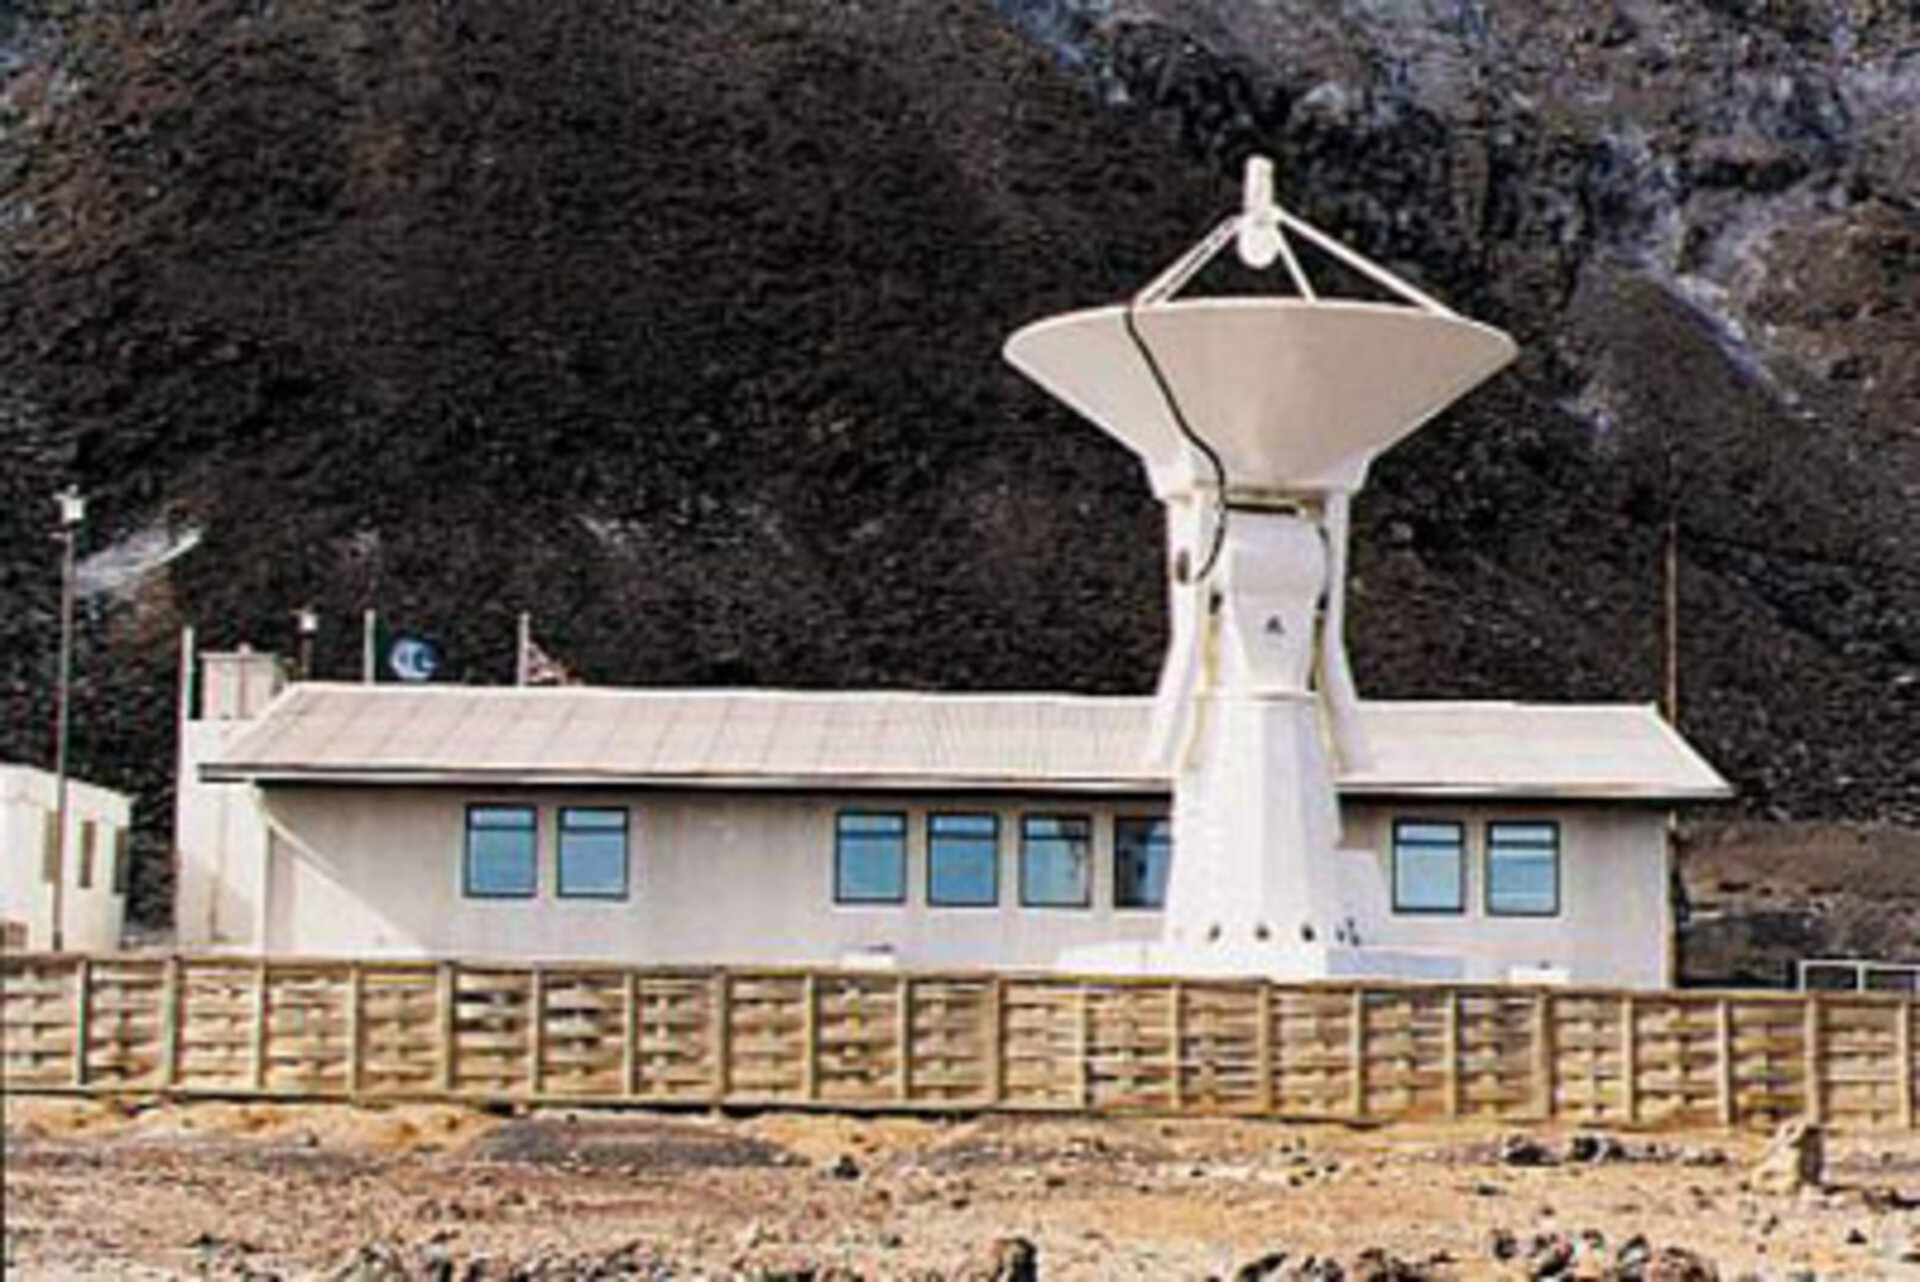 Ground station on Ascension Island used to track launchers and satellites